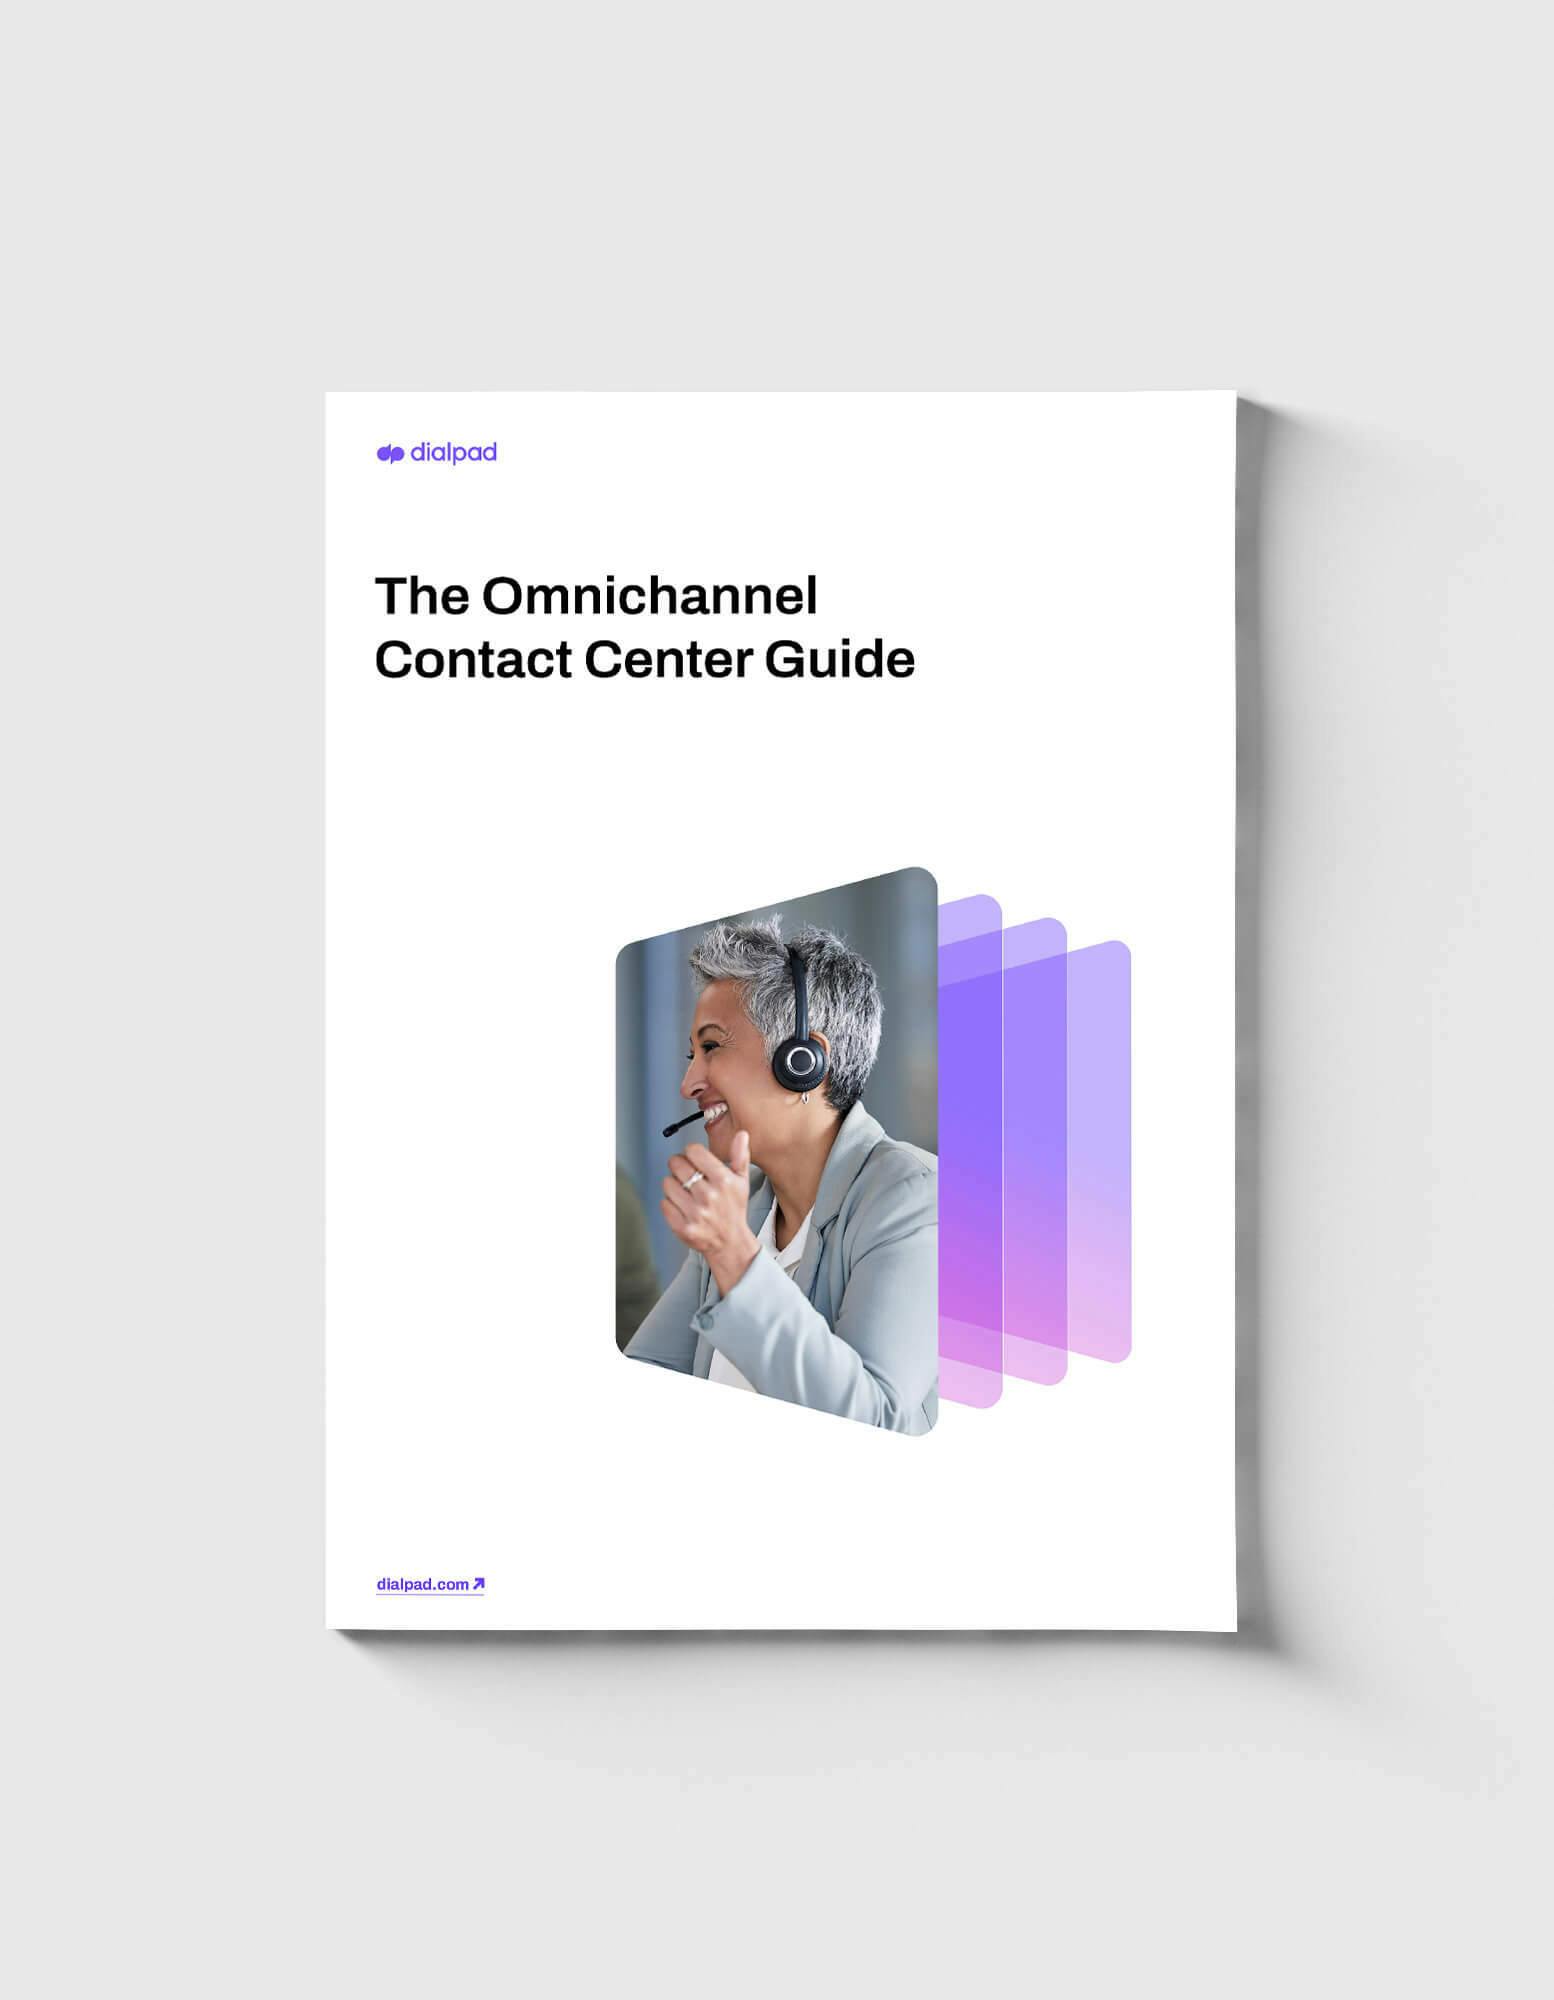 The Omnichannel Contact Center Guide